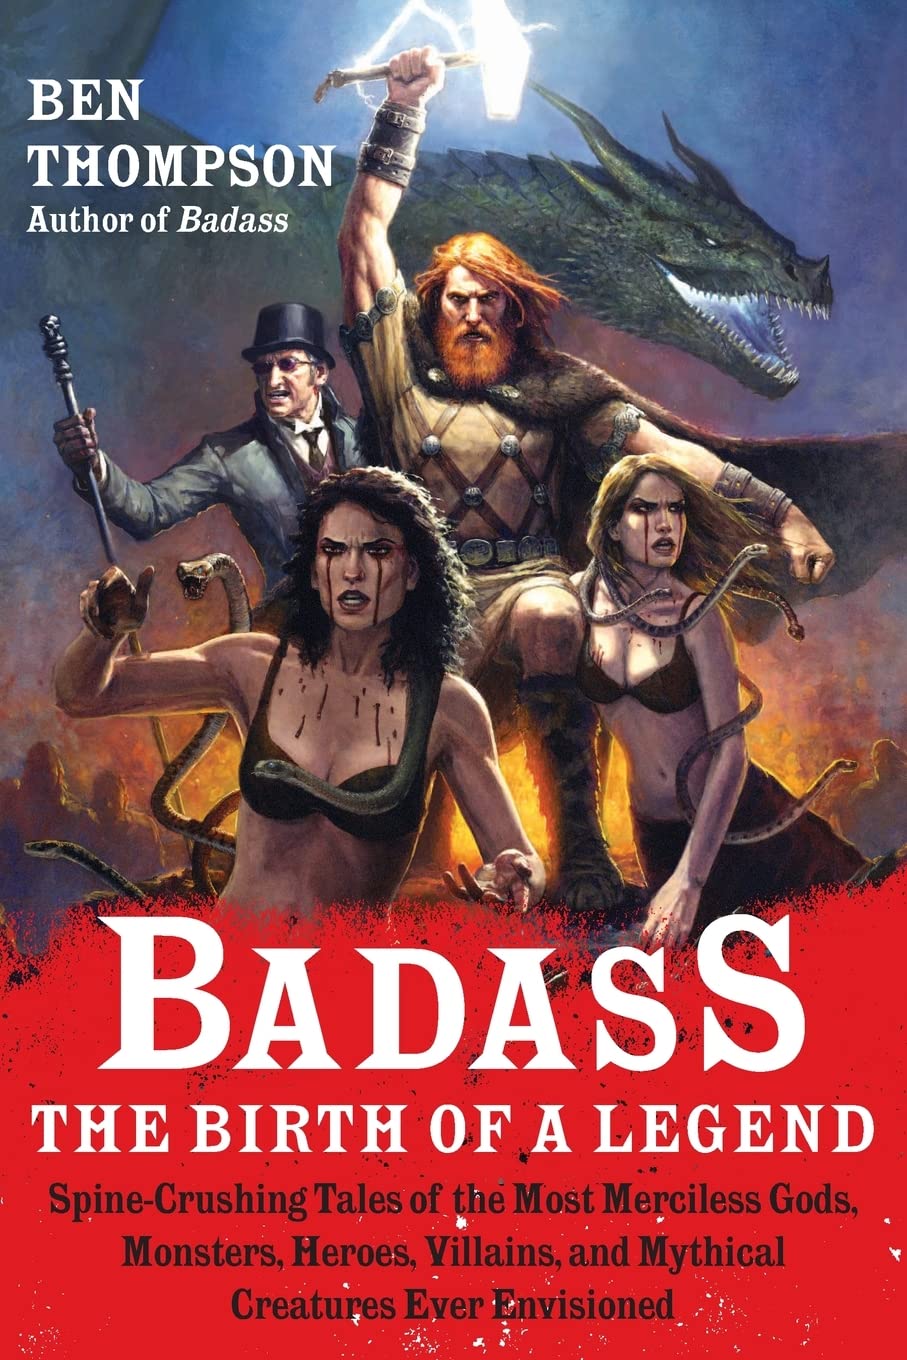 Badass: The Birth of a Legend: Spine-Crushing Tales of the Most Merciless Gods, Monsters, Heroes, Villains, and Mythical Creatures Ever Envisioned